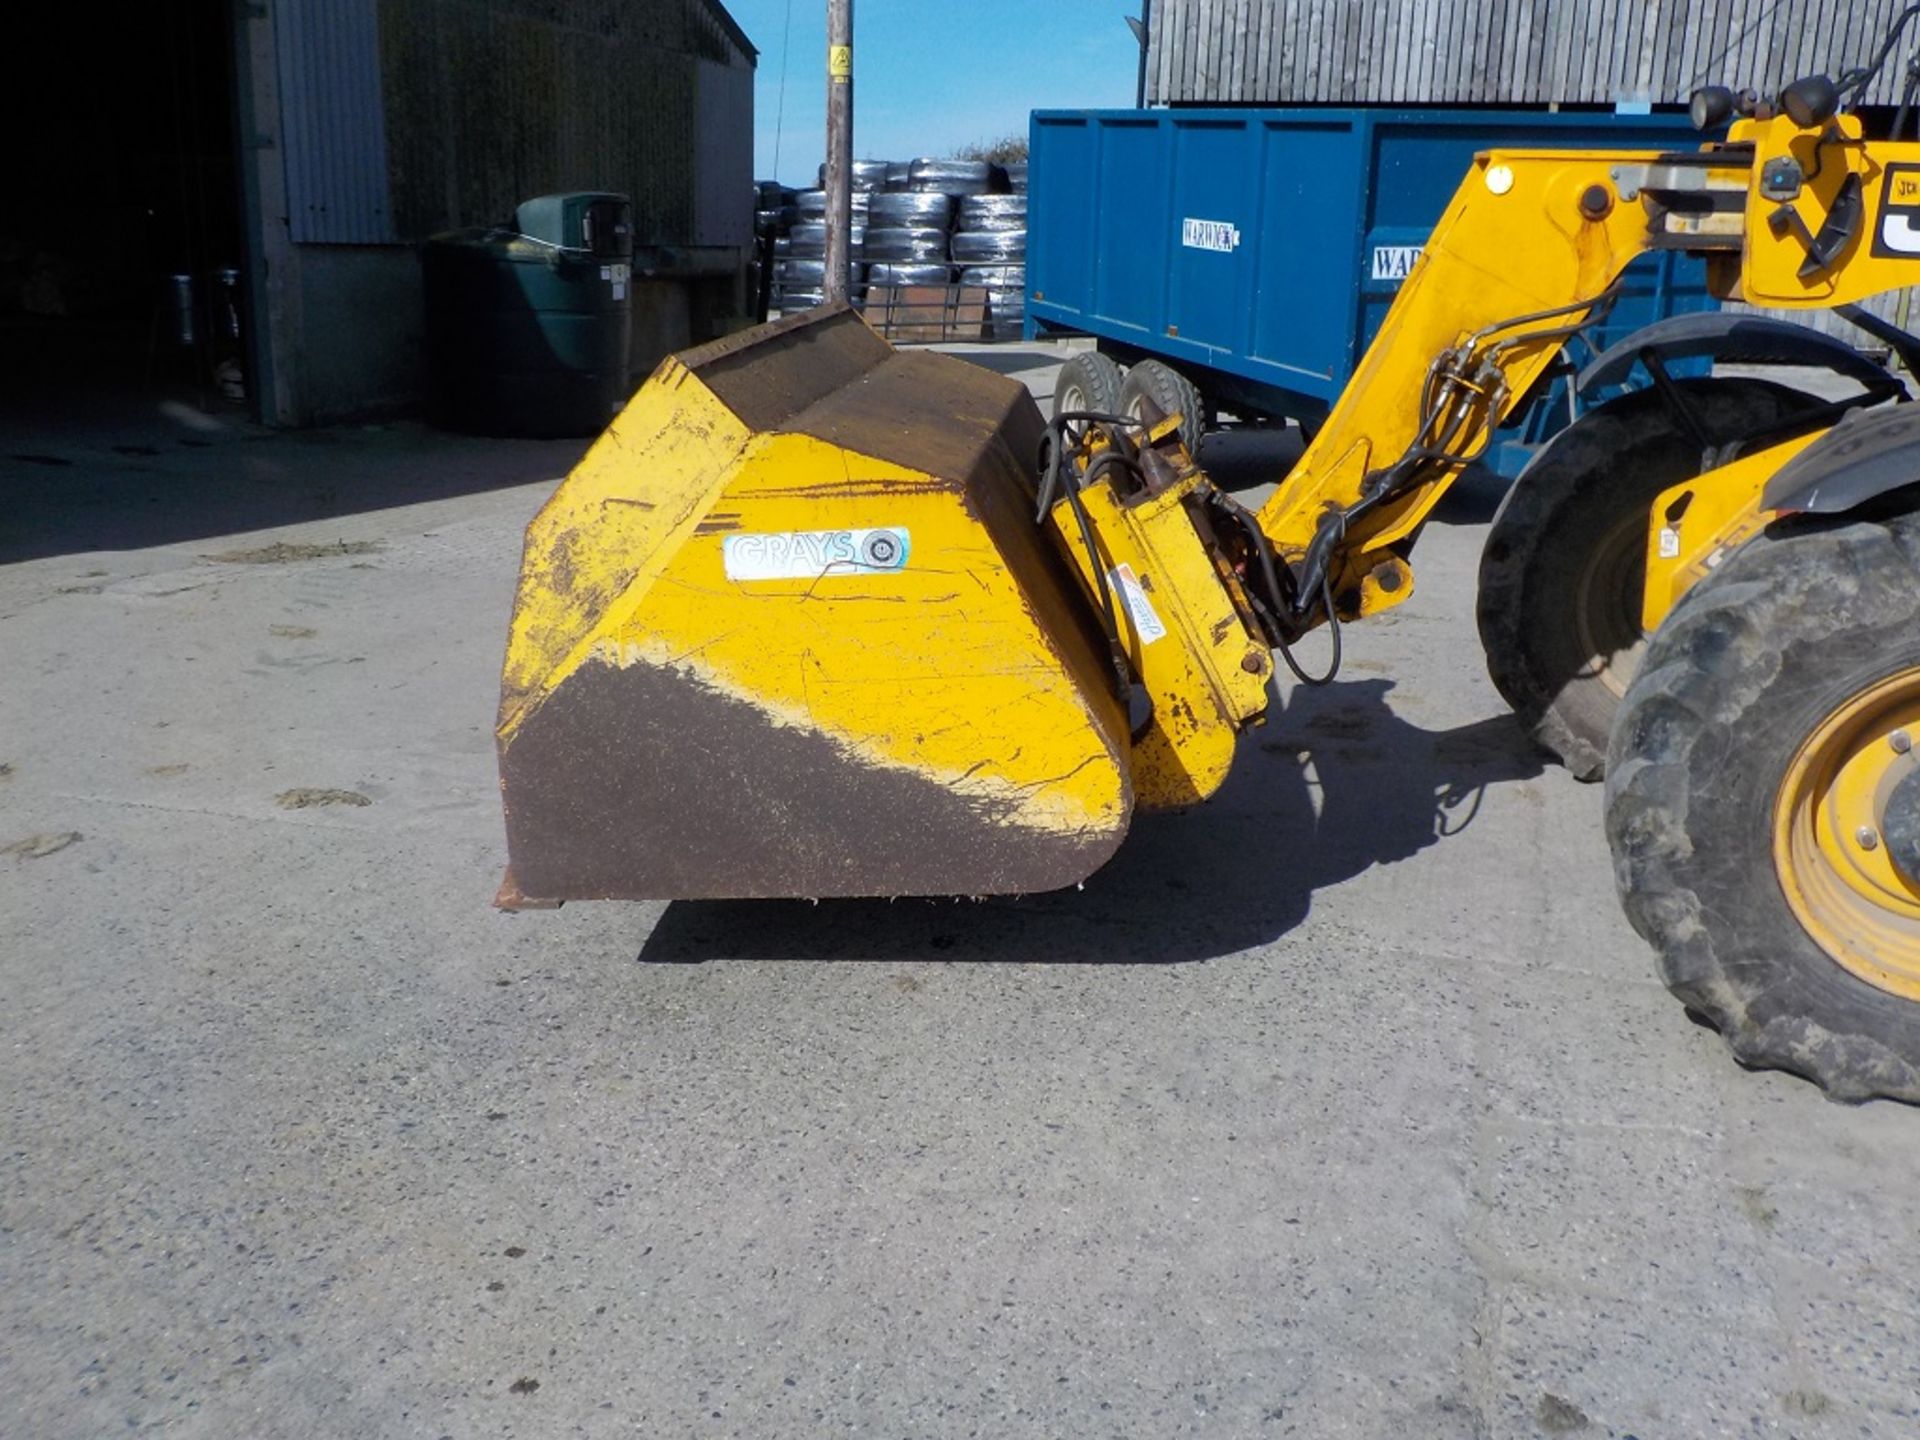 Grays Toe Tip Bucket. Has Matbro fittings, holds 1,100 kg's wheat. Location: Bude, Cornwall. - Image 2 of 2